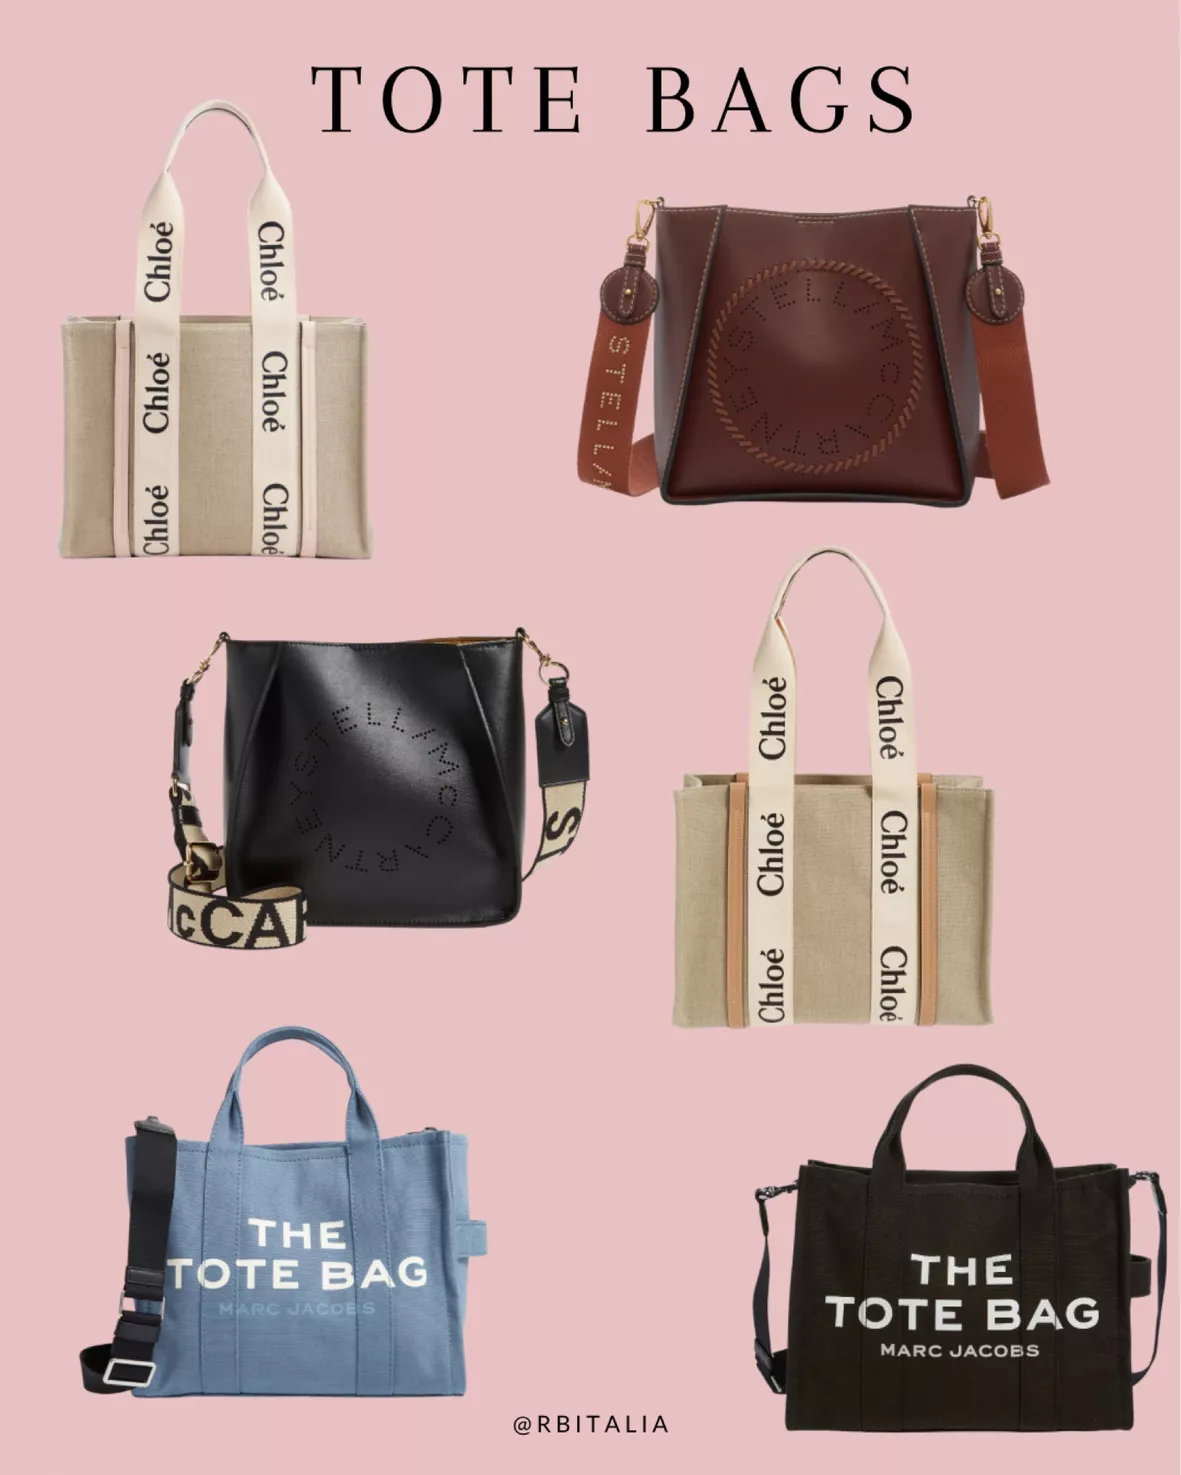 The Leather Medium Tote Bag curated on LTK